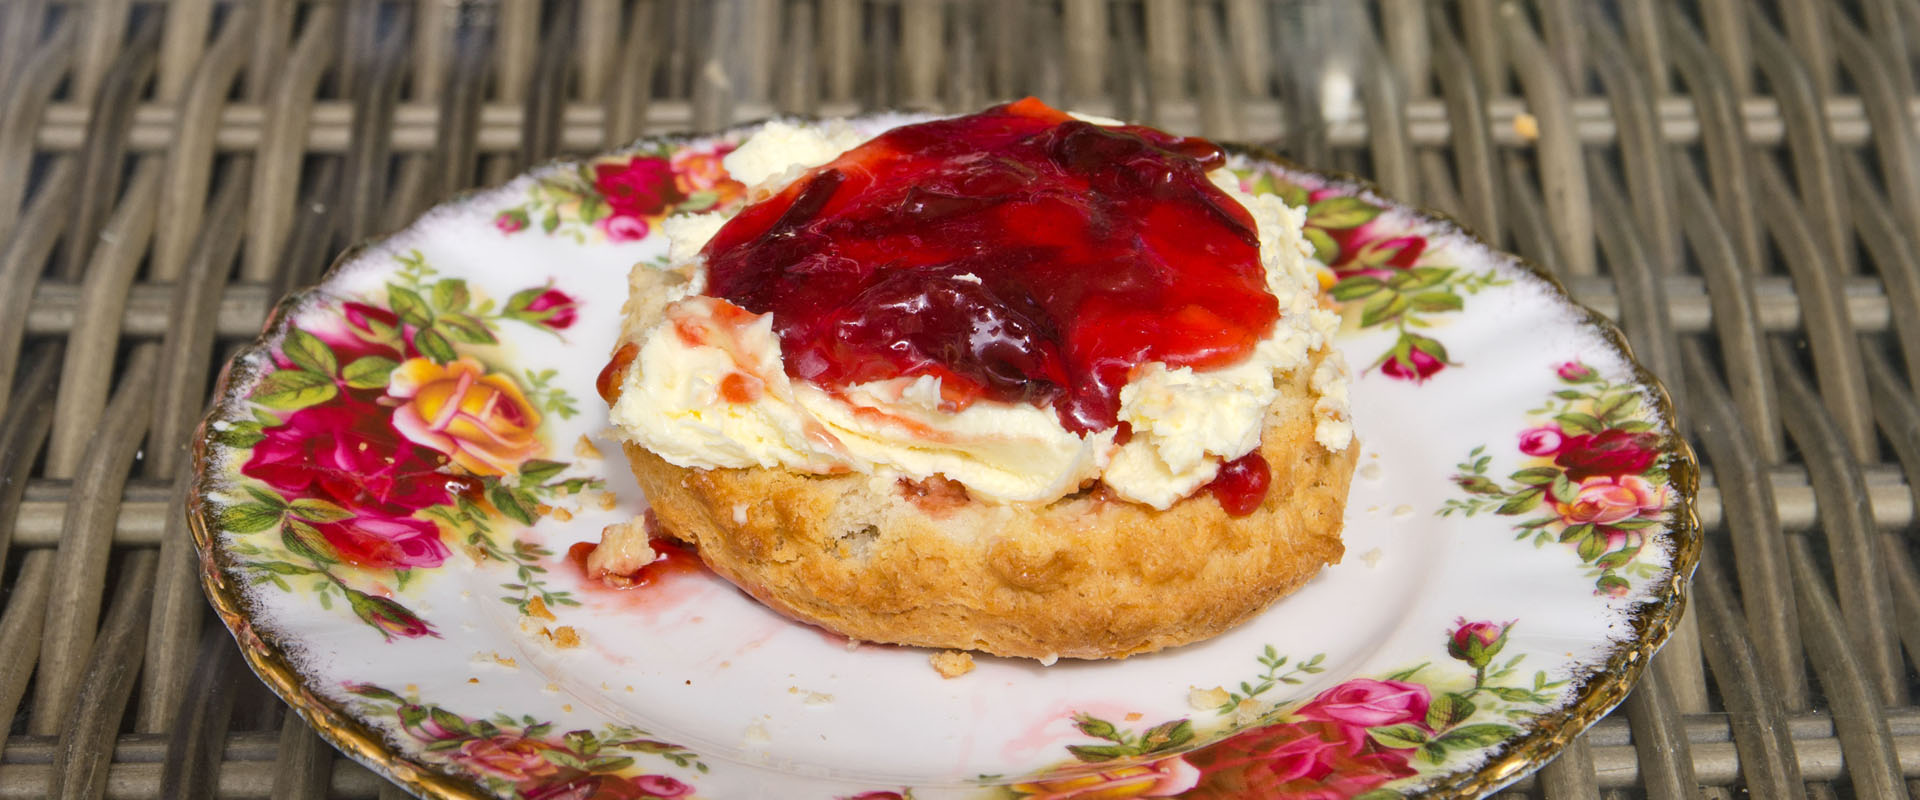 Scone with cream then jam on top